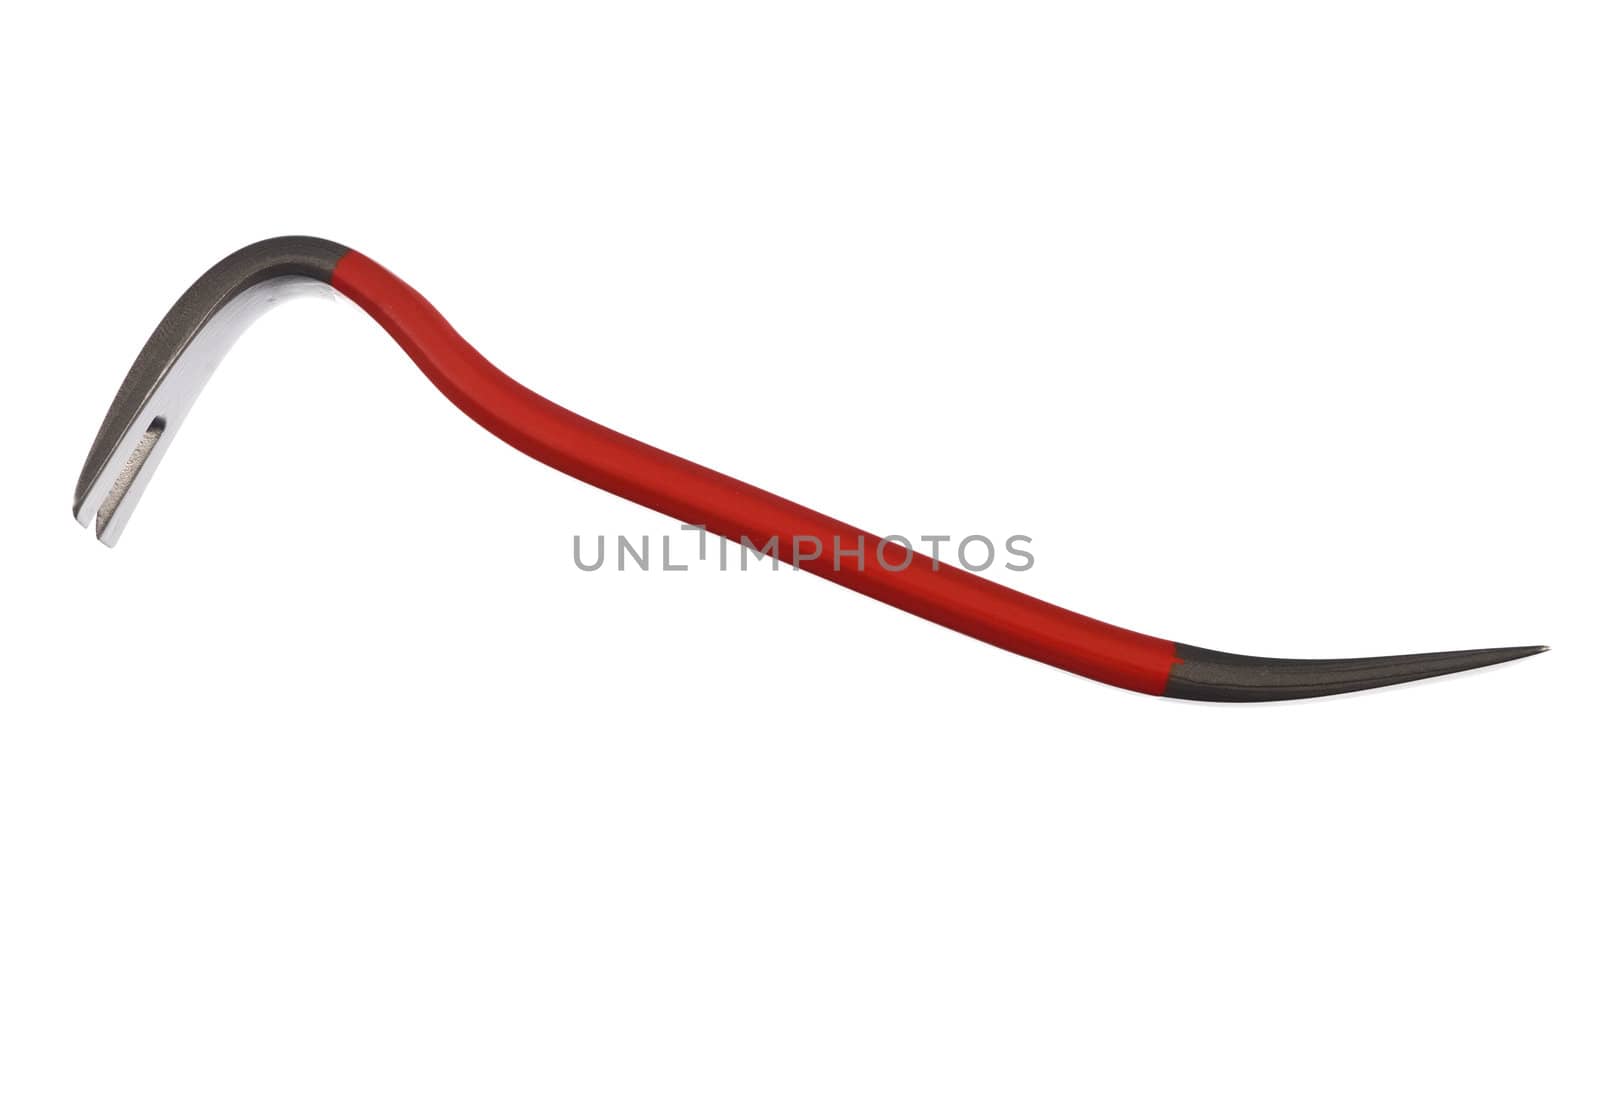 Red crowbar isolated on a white background